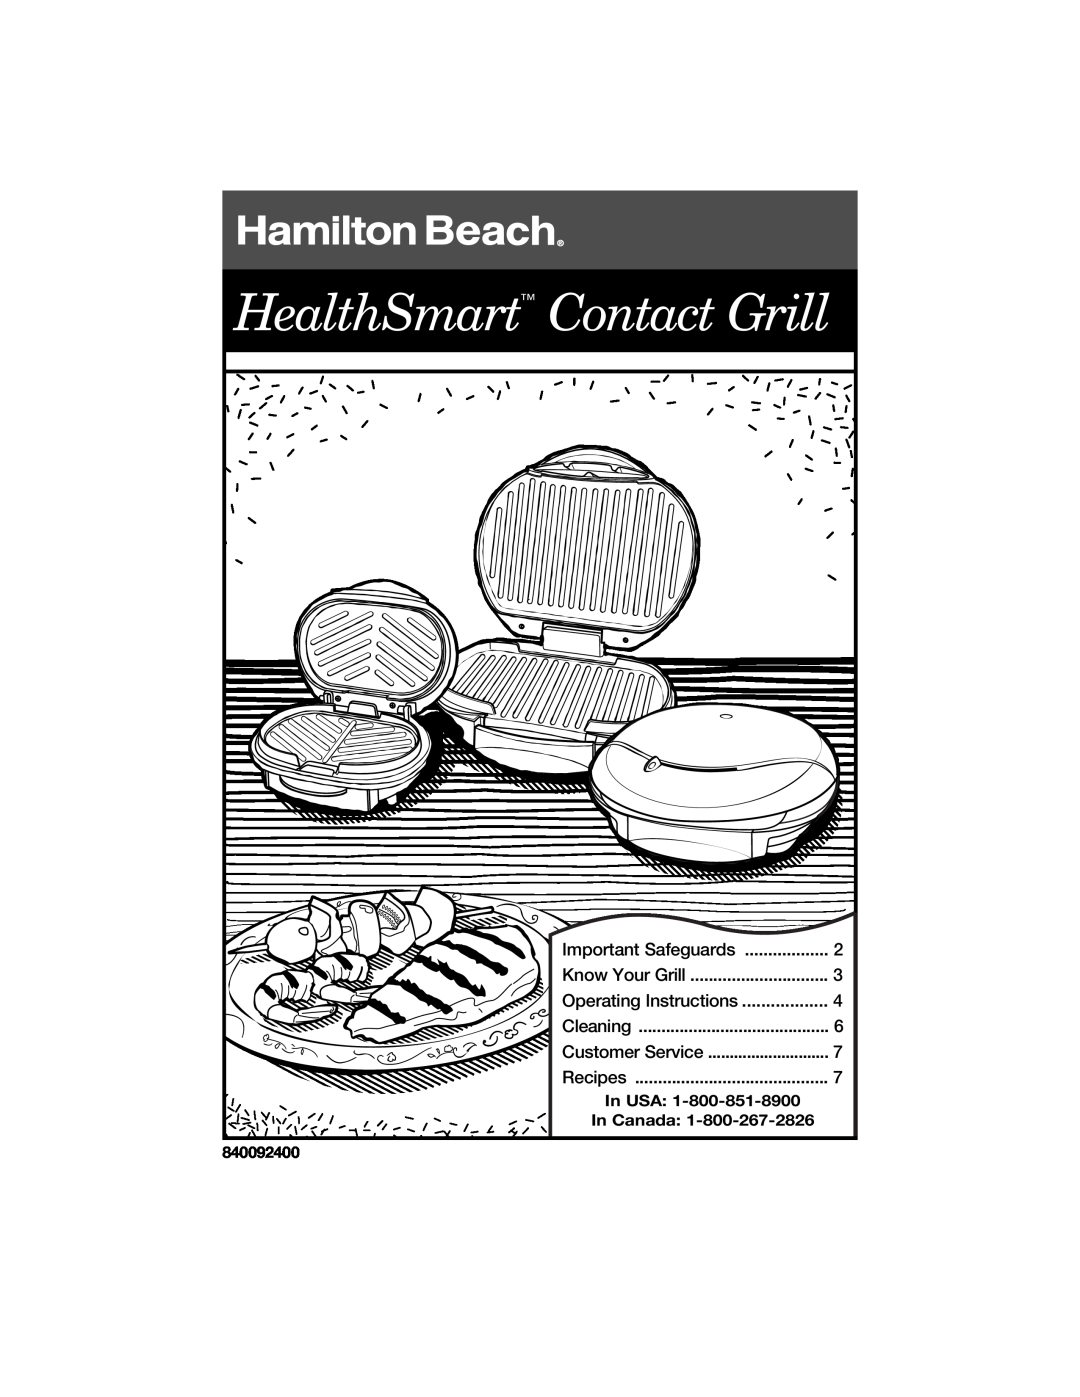 Hamilton Beach 840092400 manual HealthSmart Contact Grill, Know Your Grill, Operating Instructions, Customer Service 